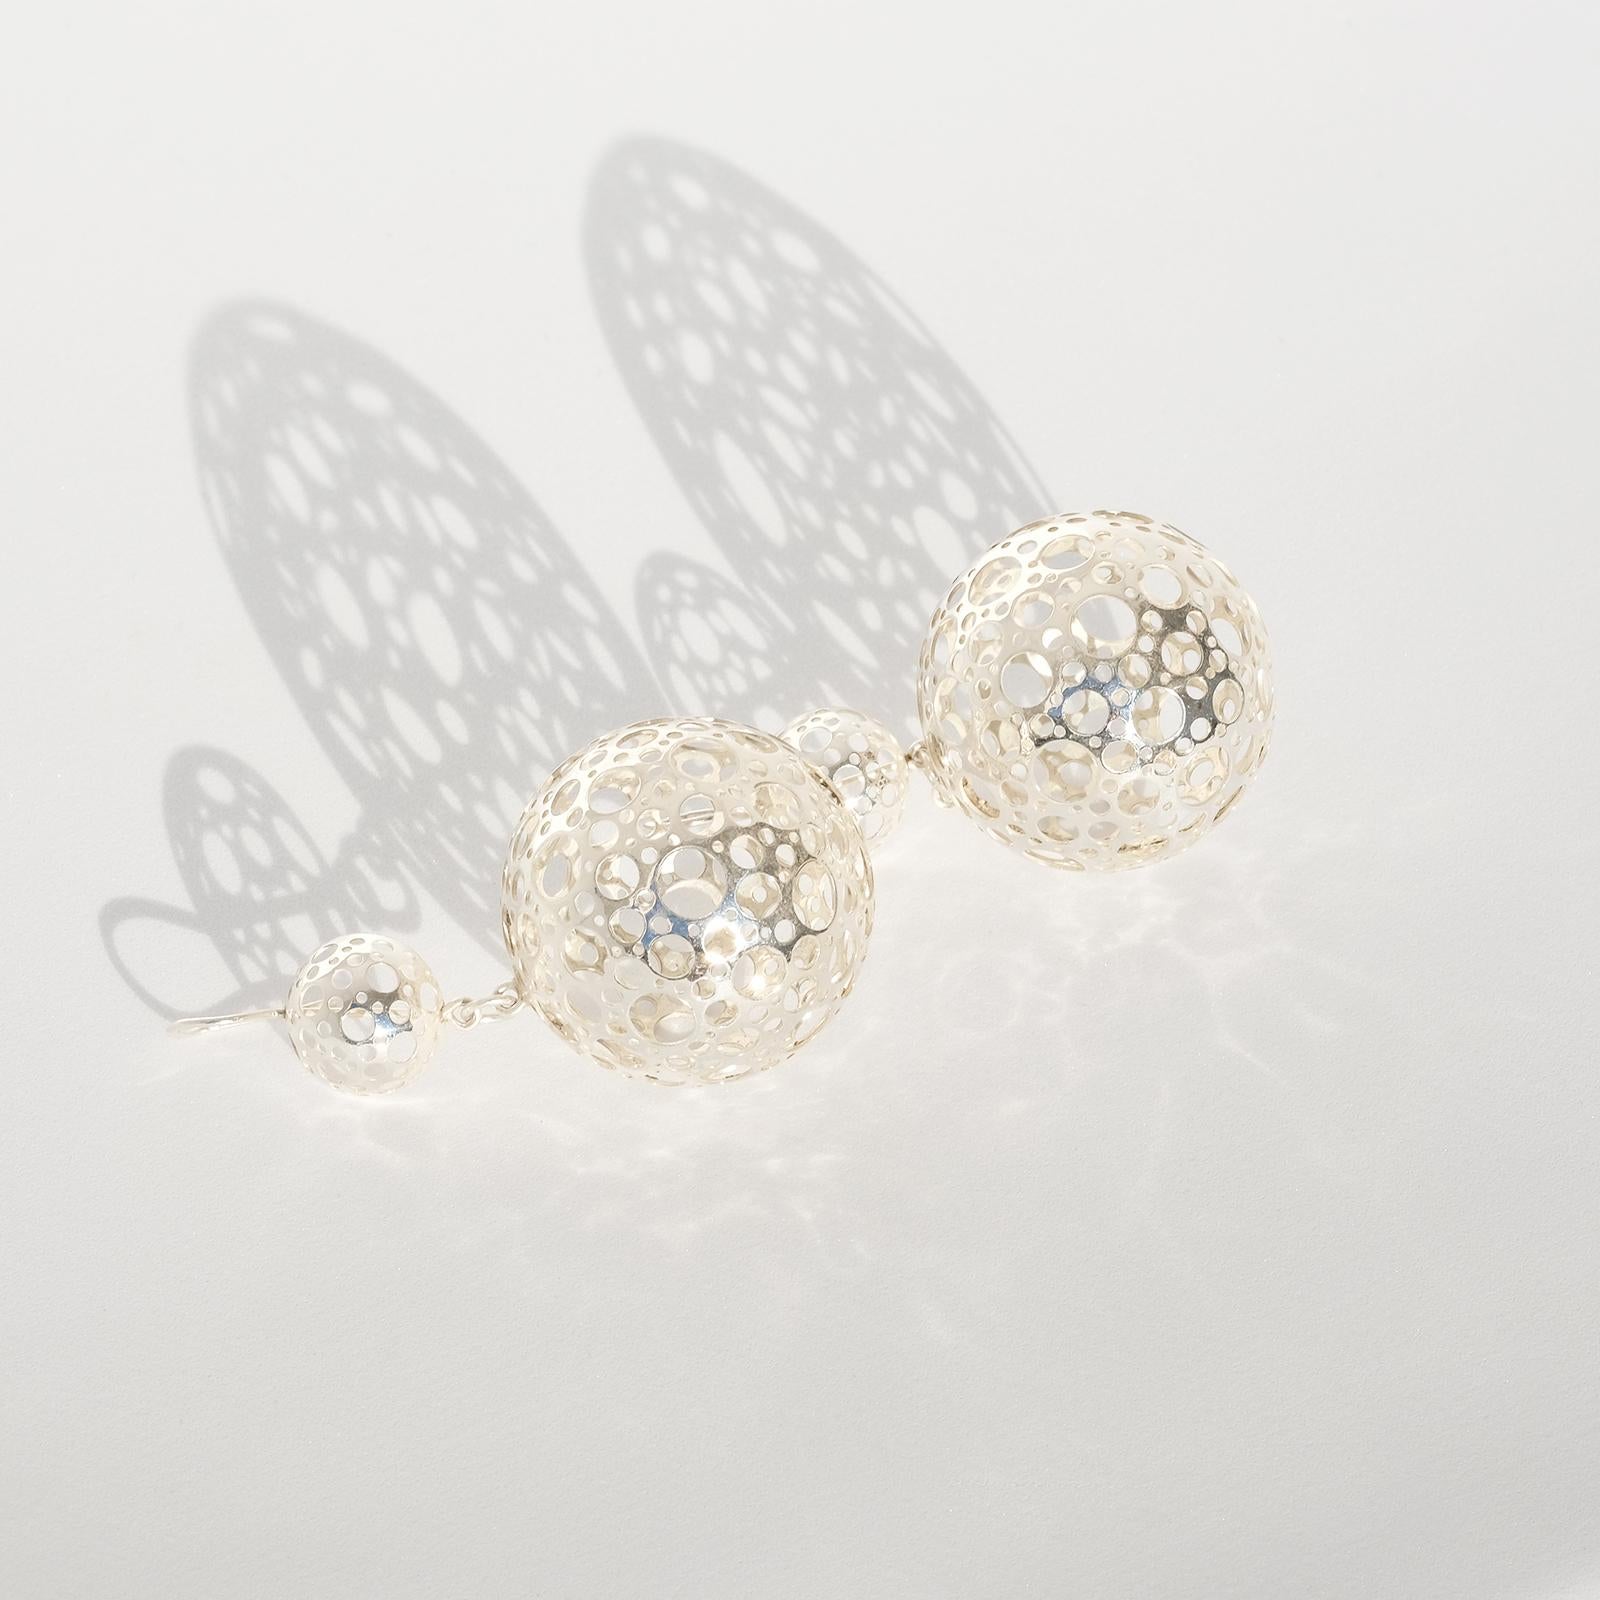 These sterling silver earrings are part of Liisa Vitali's famous serie “Leppäkerttu”, which means ladybug. The earrings have a round shape and are adorned with Vitali's signature pattern of circular cut-outs.

These earrings will not be ignored by